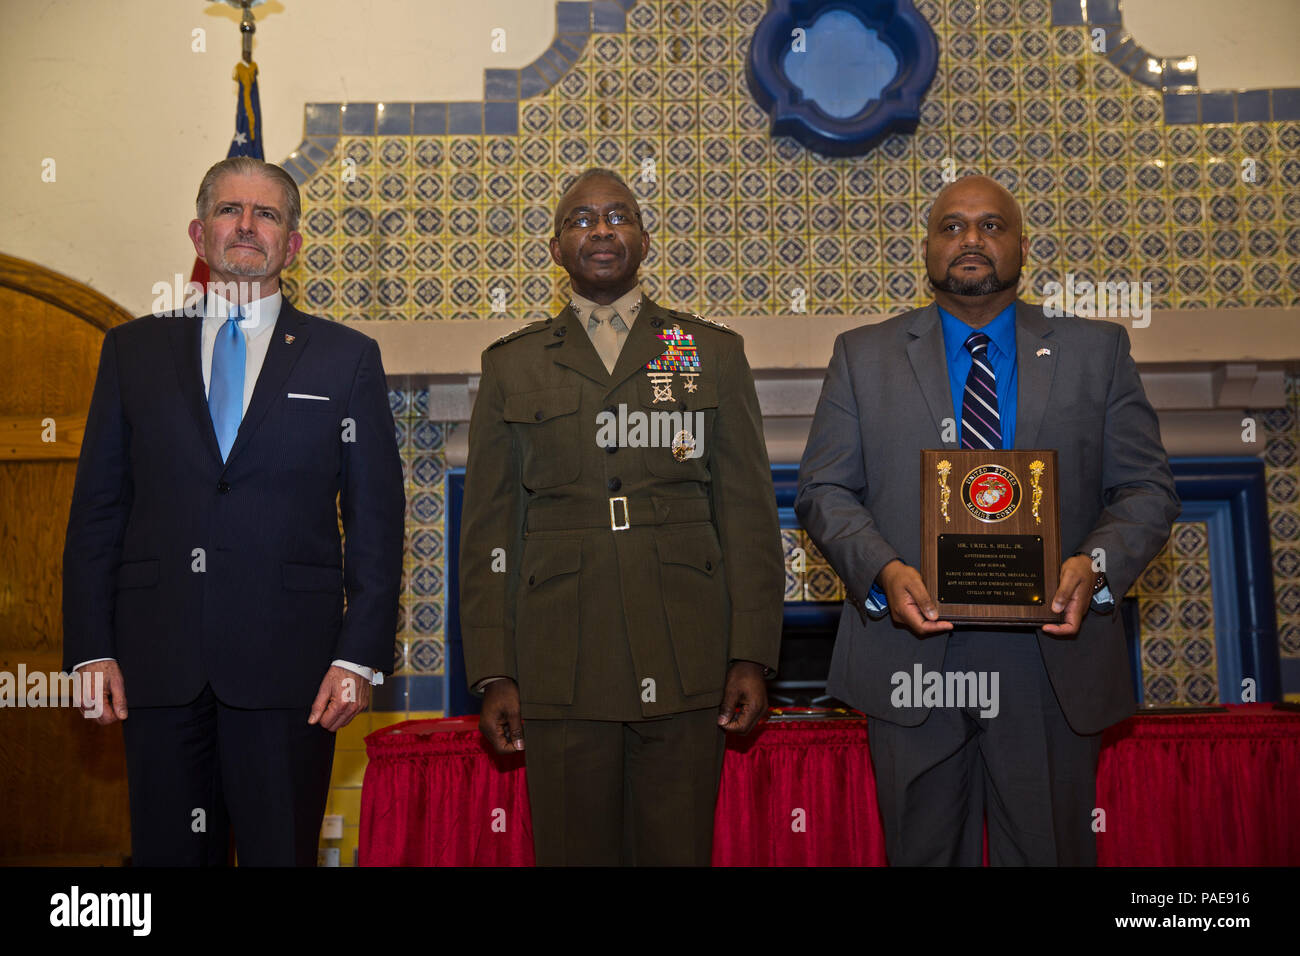 Mr. Uriel S. Hill, Jr., right, an anti-terrorism officer at Marine Corps Base Camp Butler, Camp Schwab, Okinawa, Japan, poses for a photograph with Lt. Gen. Ronald Bailey, center, Deputy Commandant Plans, Policies, and Operations, and Mr. Randy Smith, Assistant Deputy Commandant Plans, Policies, and Operations, during a ceremony held at Marine Corps Recruit Depot San Diego, Calif., March 8, 2016. Hill was recognized for making a positive change in his command by improving work flow. (U.S. Marine Corps photo by Lance Cpl. Robert G. Gavaldon/Released) Stock Photo